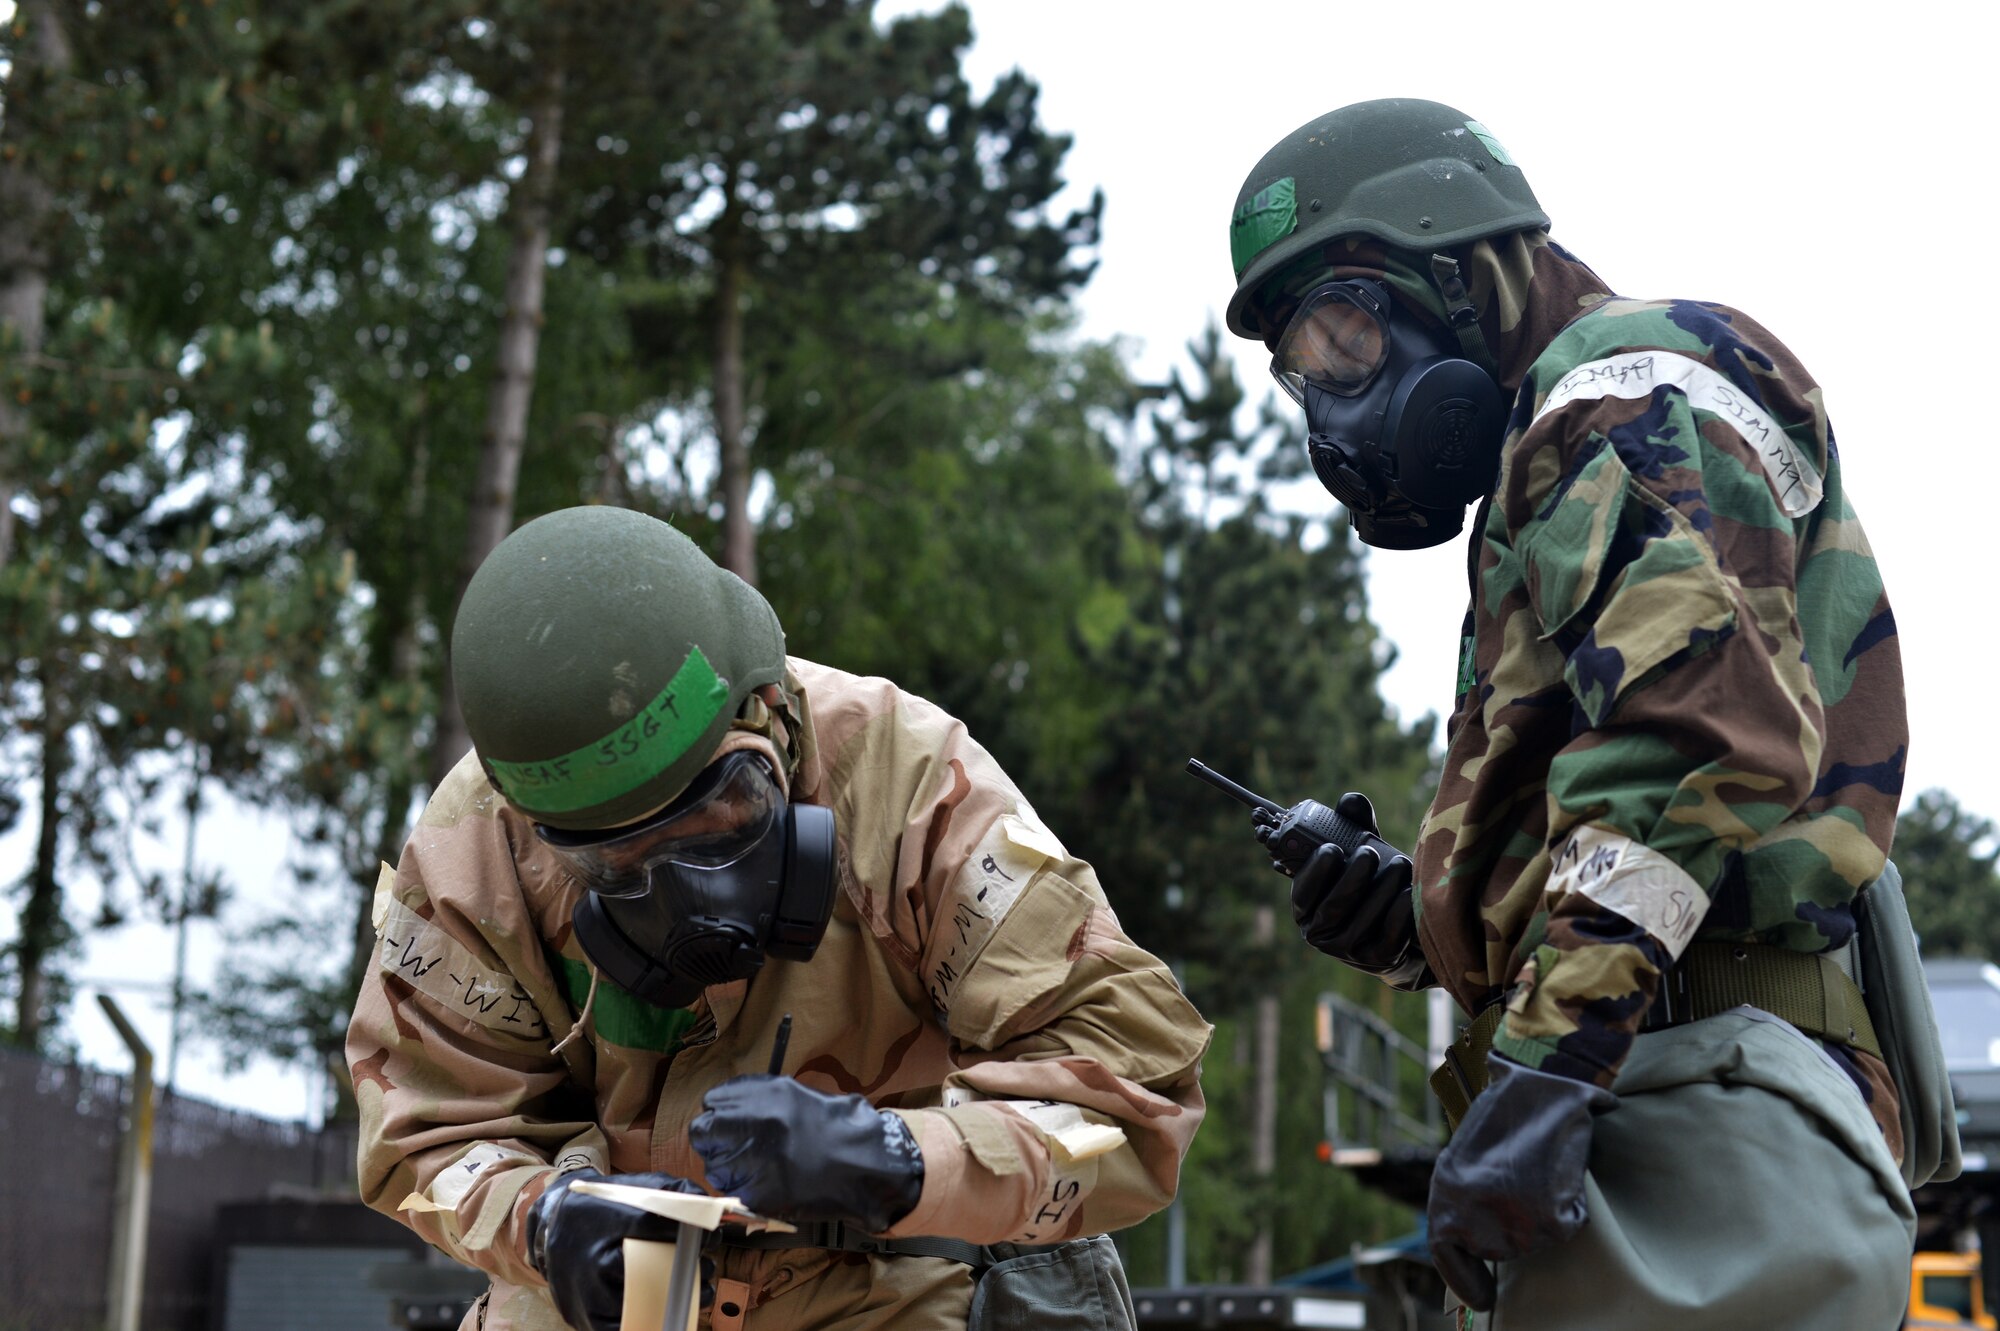 48th Fighter Wing Airmen conduct post-attack reconnaissance during a readiness exercise at Royal Air Force Lakenheath, England, June 5, 2018. Exercise training emphasized a broad spectrum of elements from pre-attack preparedness, command and control, and protection of assets and personnel, to post-attack reconnaissance and self-aid buddy care for wounded wingmen. (U.S. Air Force photo by Master Sgt. Eric Burks) (Portions of this image have been obscured to protect operational security)